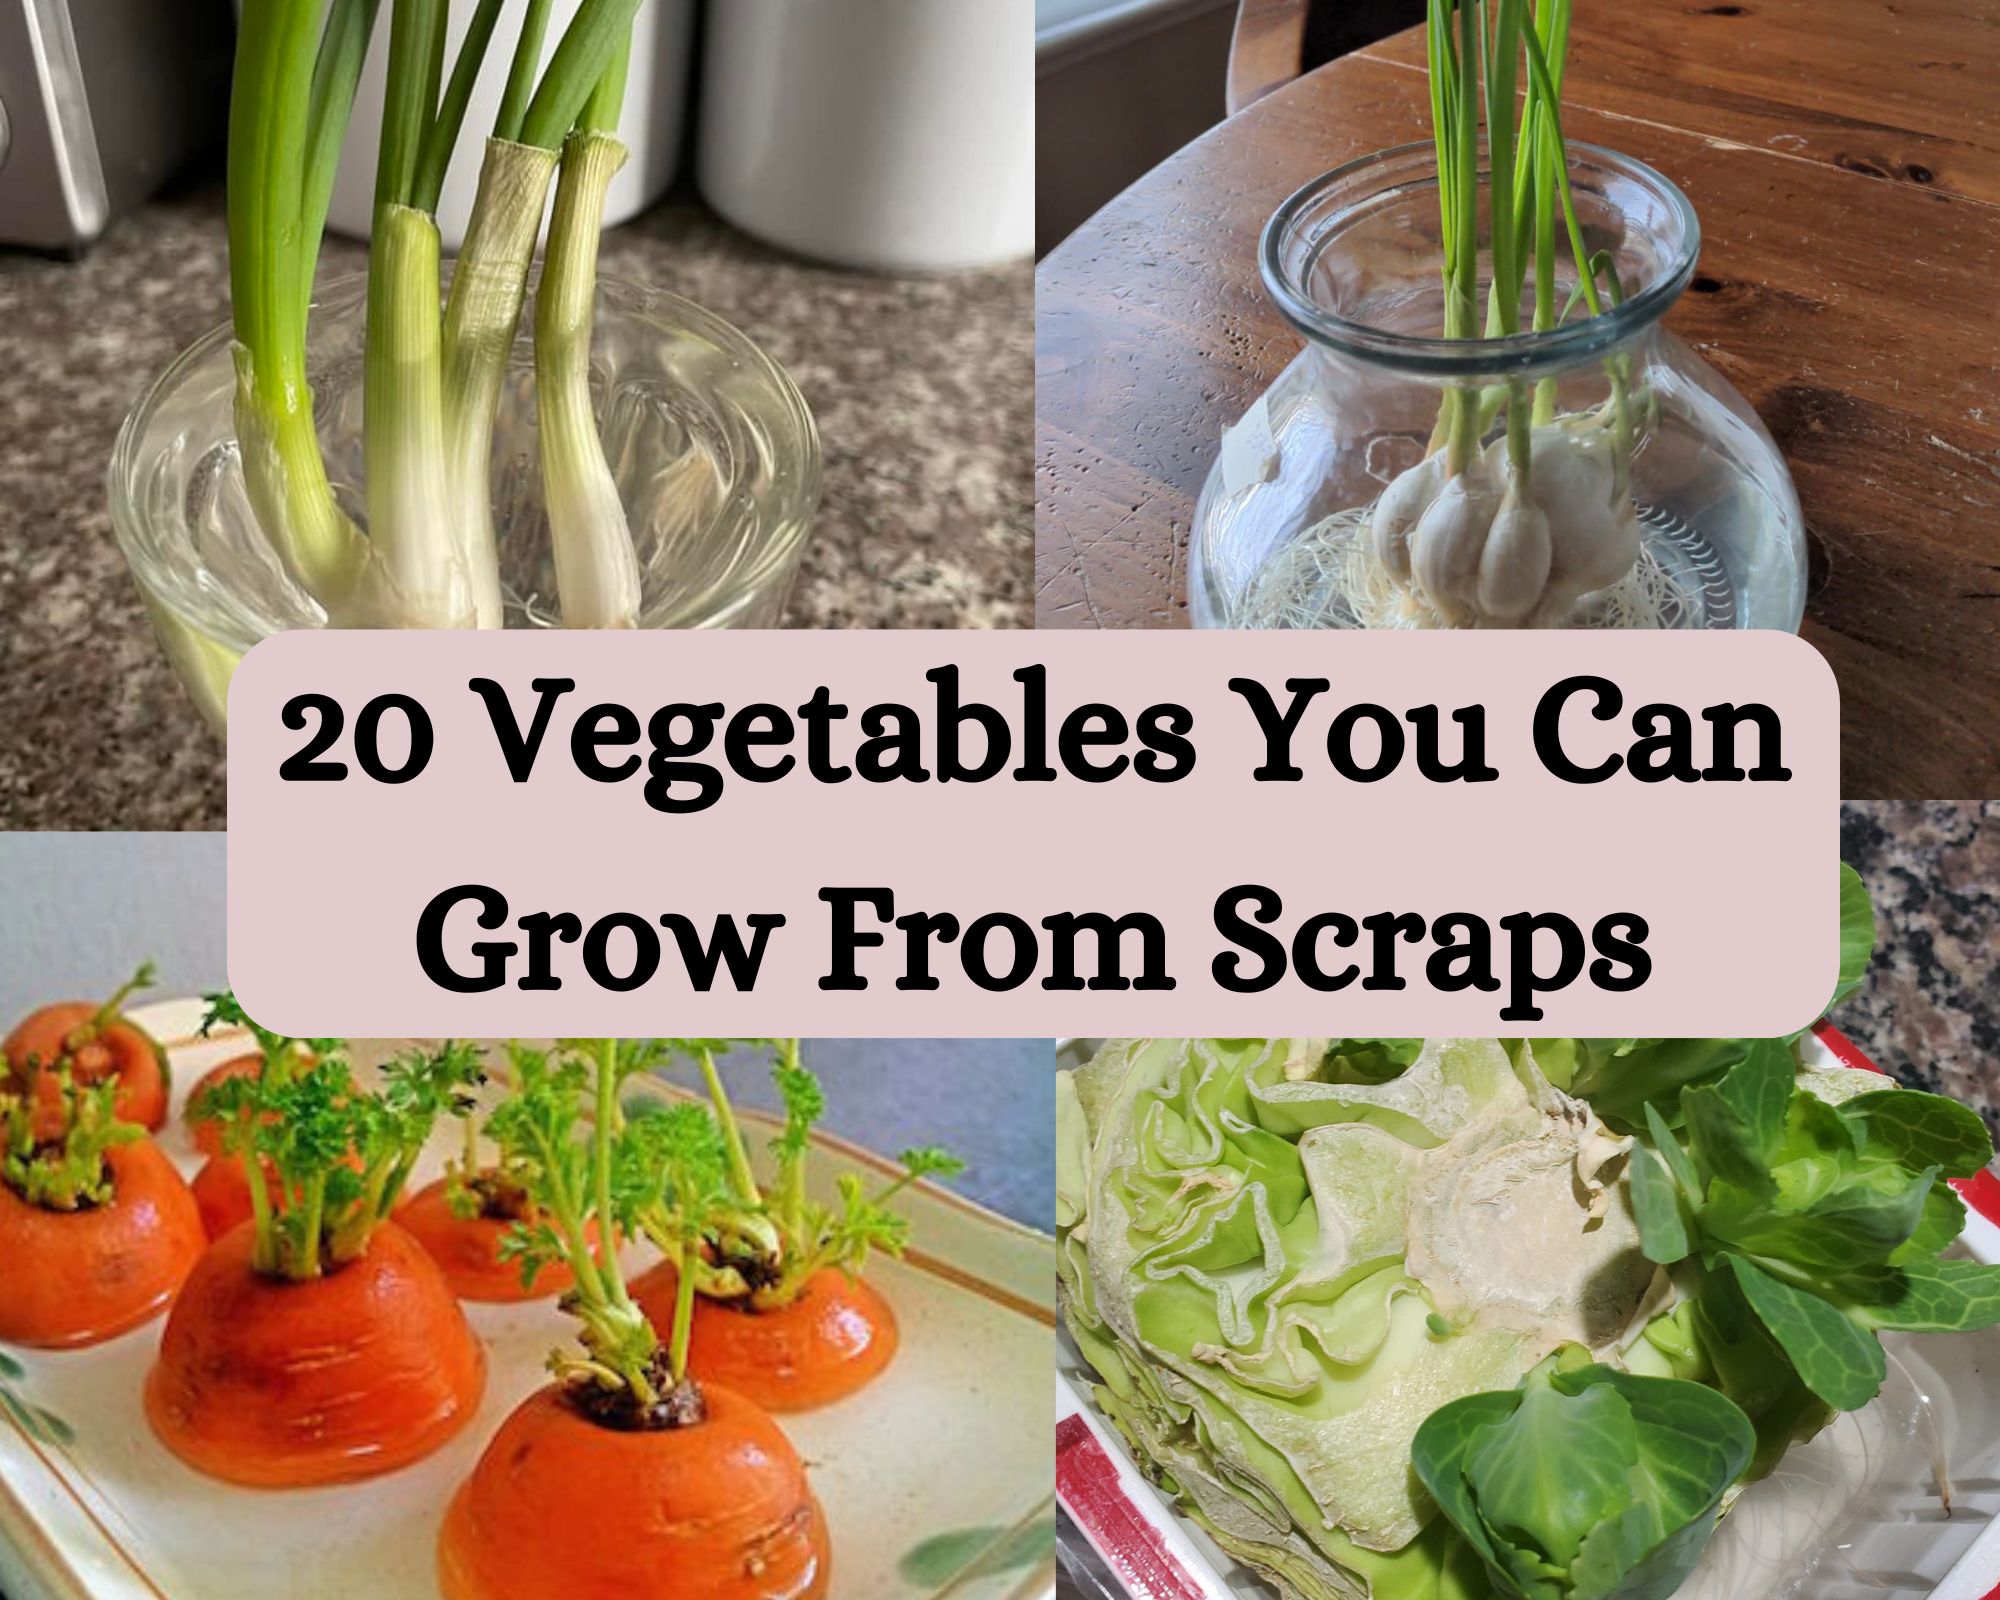 Vegetables You Can Grow From Scraps